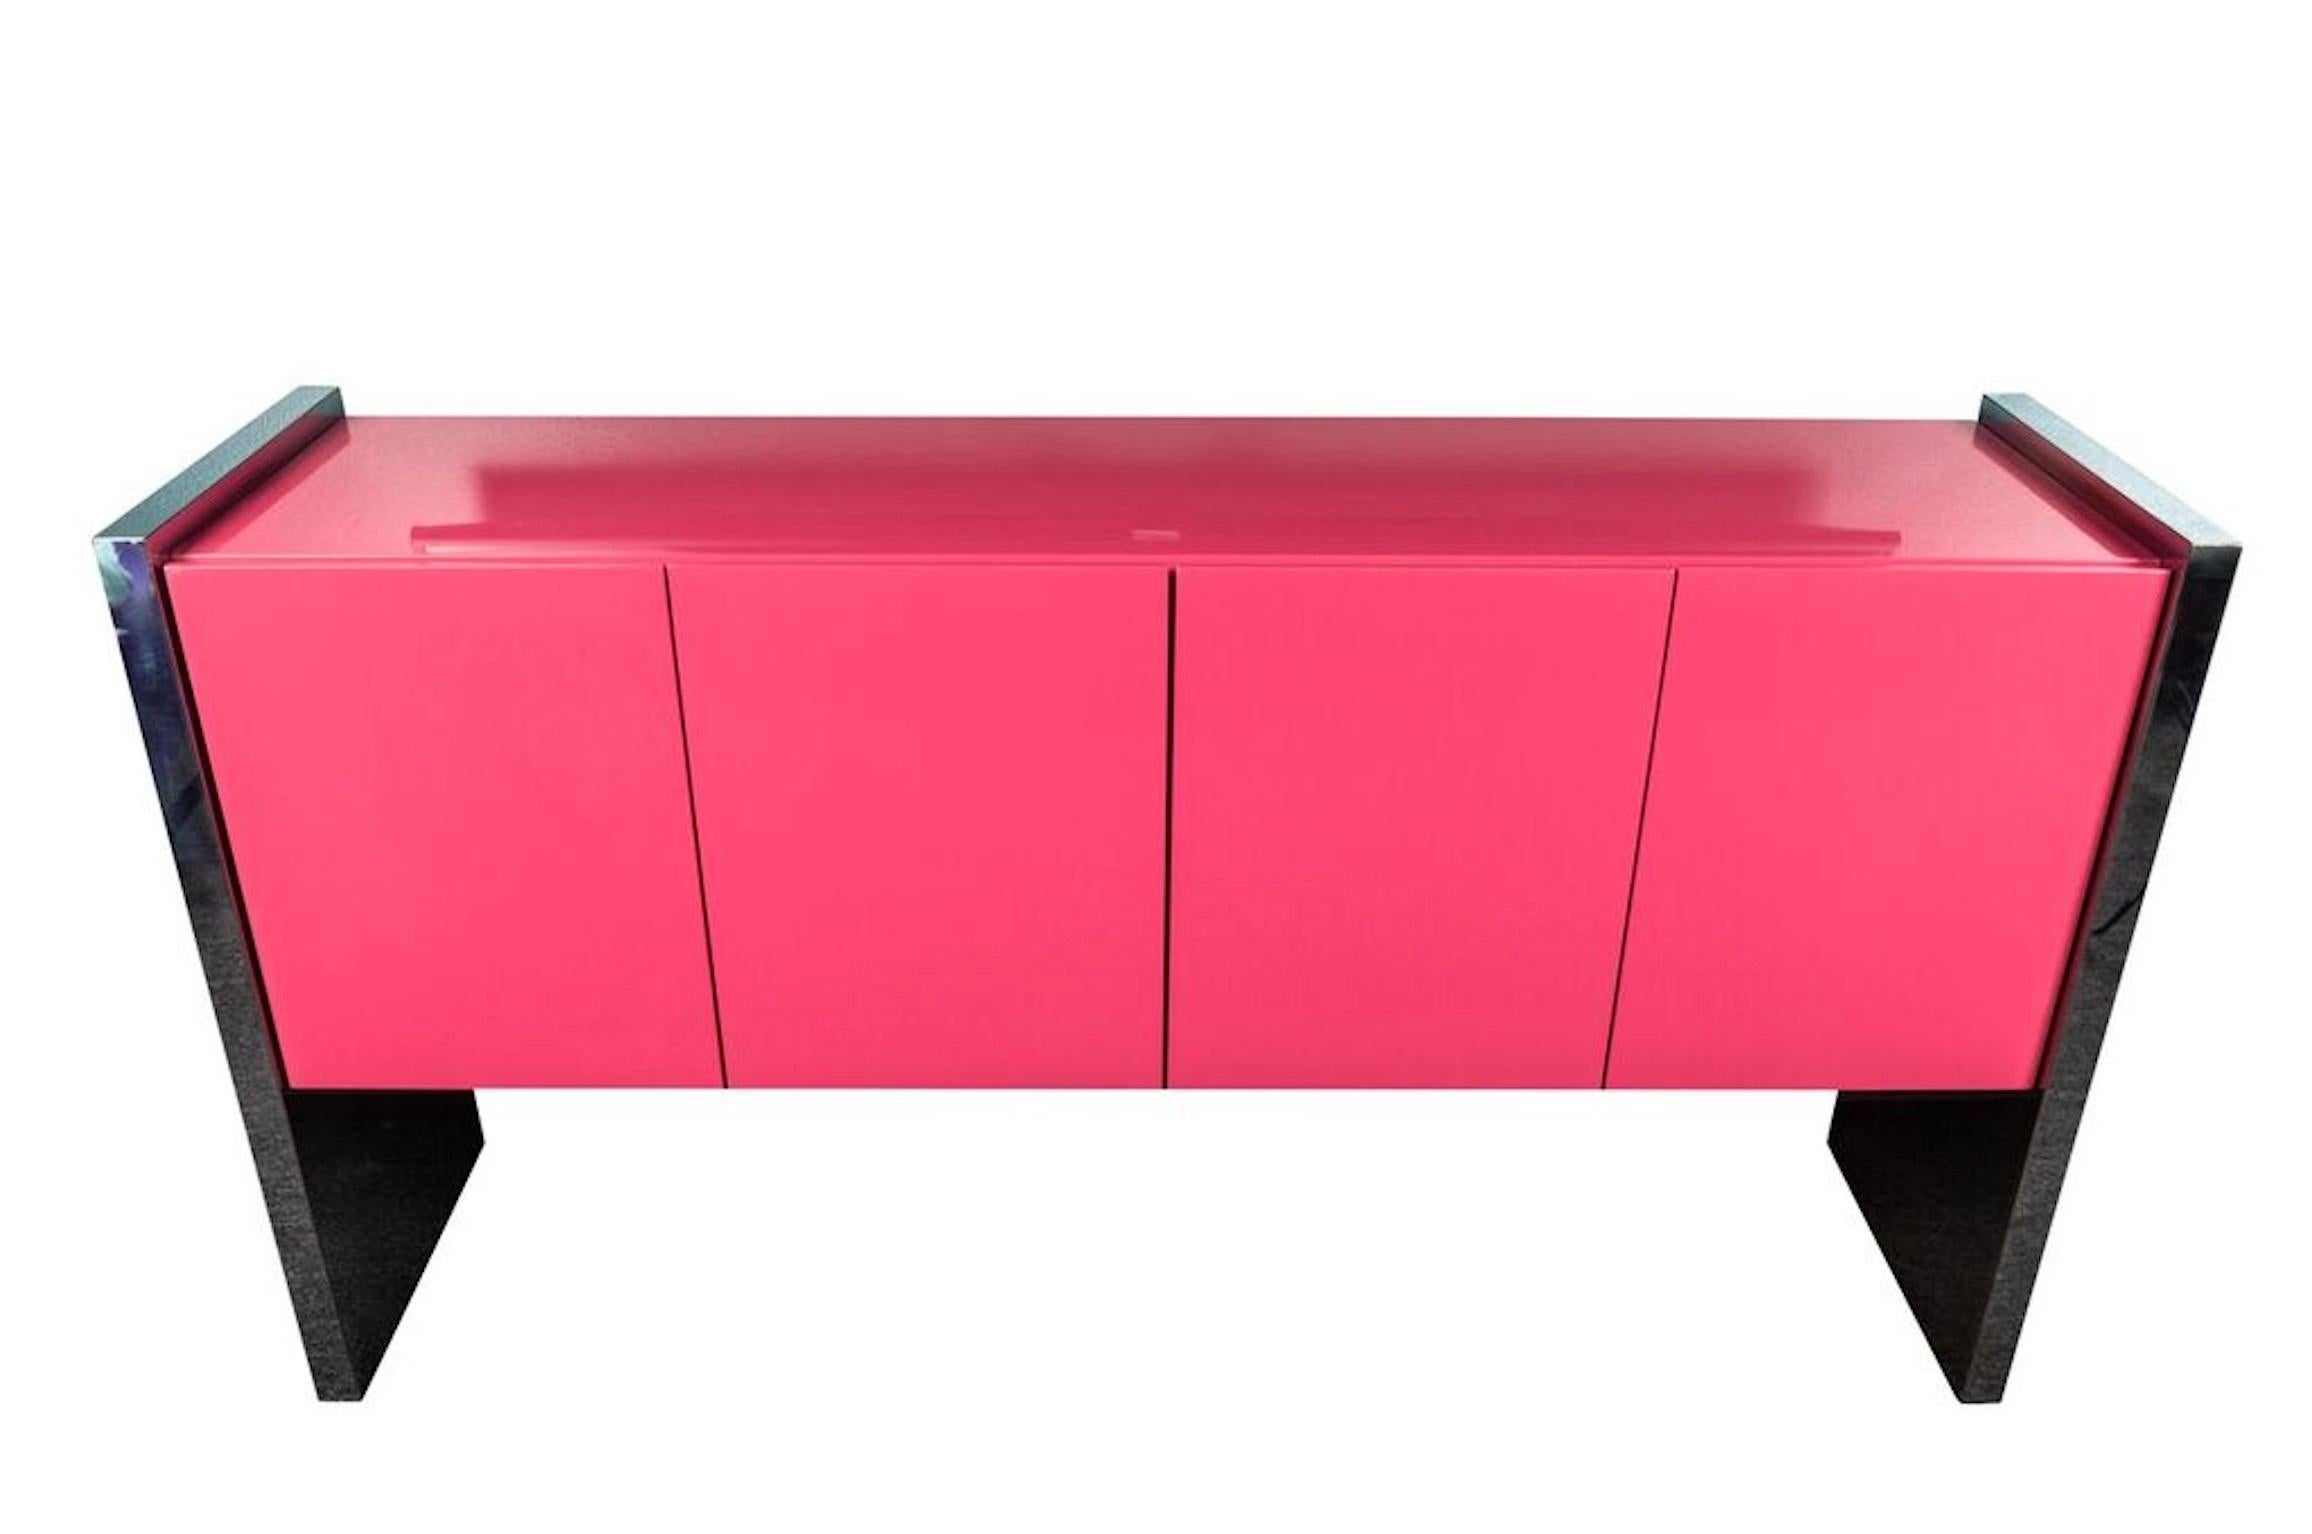 High polished lacquered cabinet, with chromed steel sides and legs. Wood with pink lacquer. Manufacturer Label, 1970 Highpoint NC.